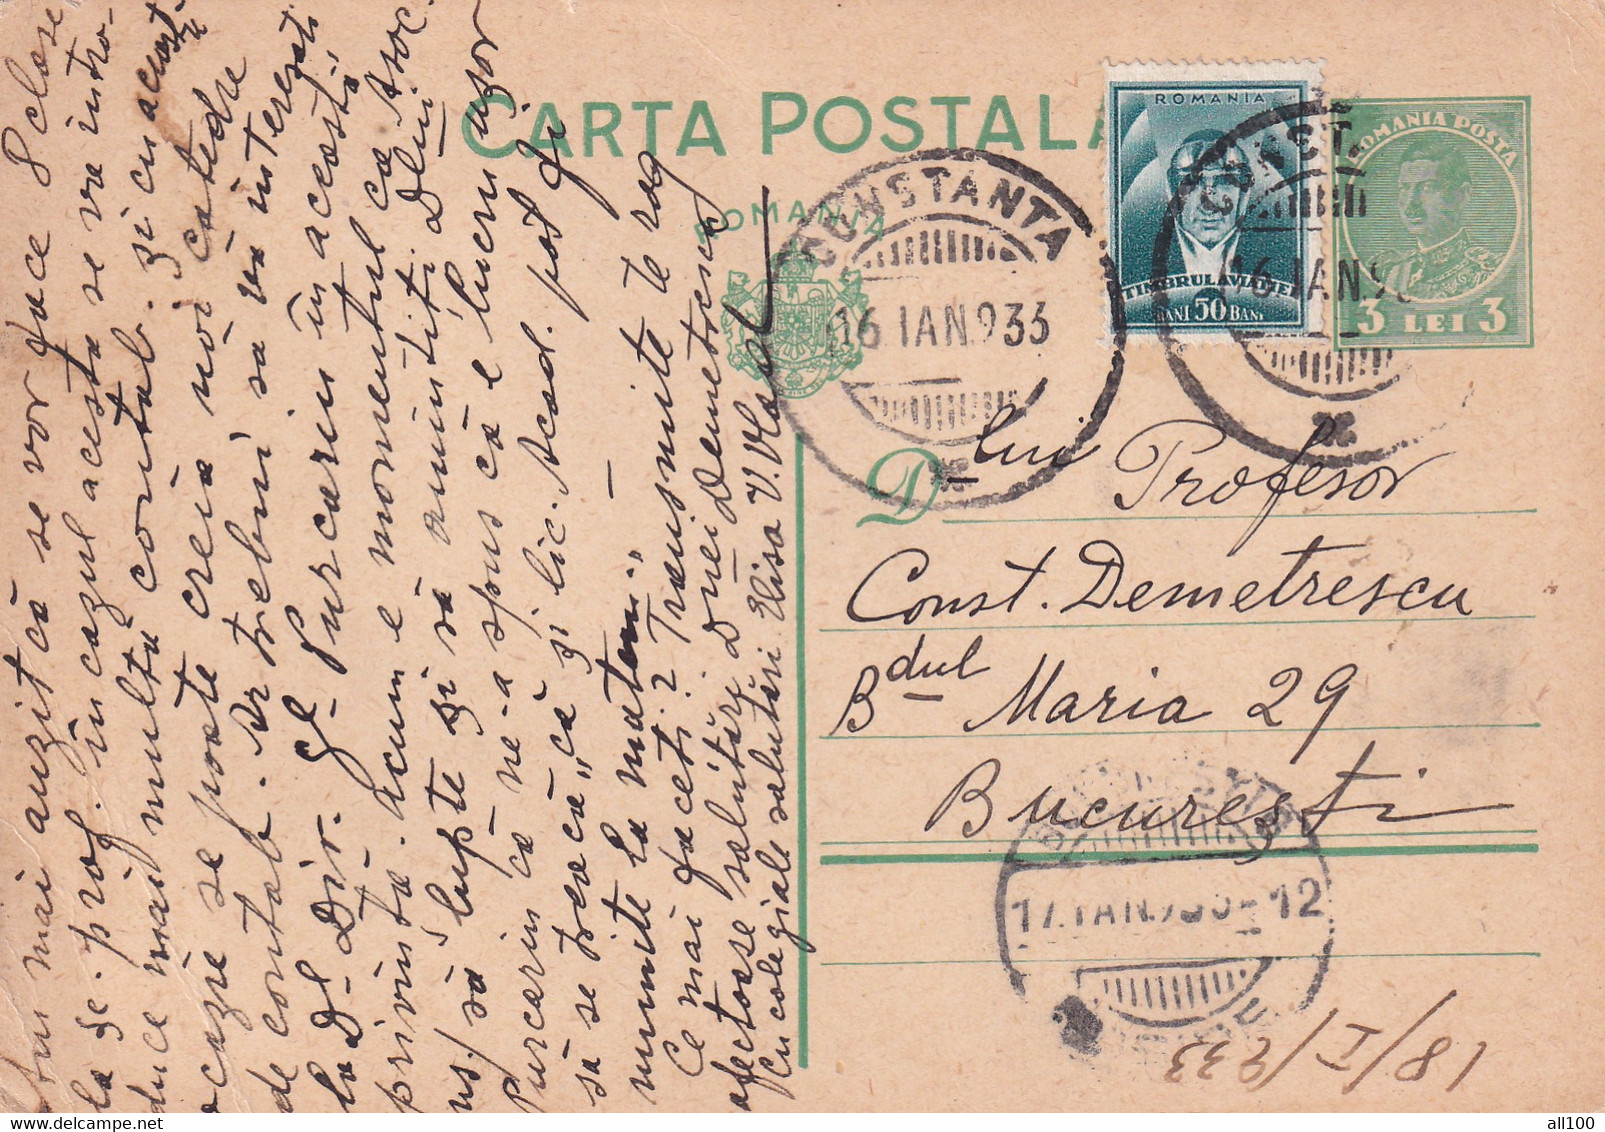 A16496-  CARTA POSTALA SENT FROM CONSTANTA  TO BUCHAREST 1933 KING MICHAEL 3 LEI AVIATION STAMP POSTAL STATIONERY - Used Stamps